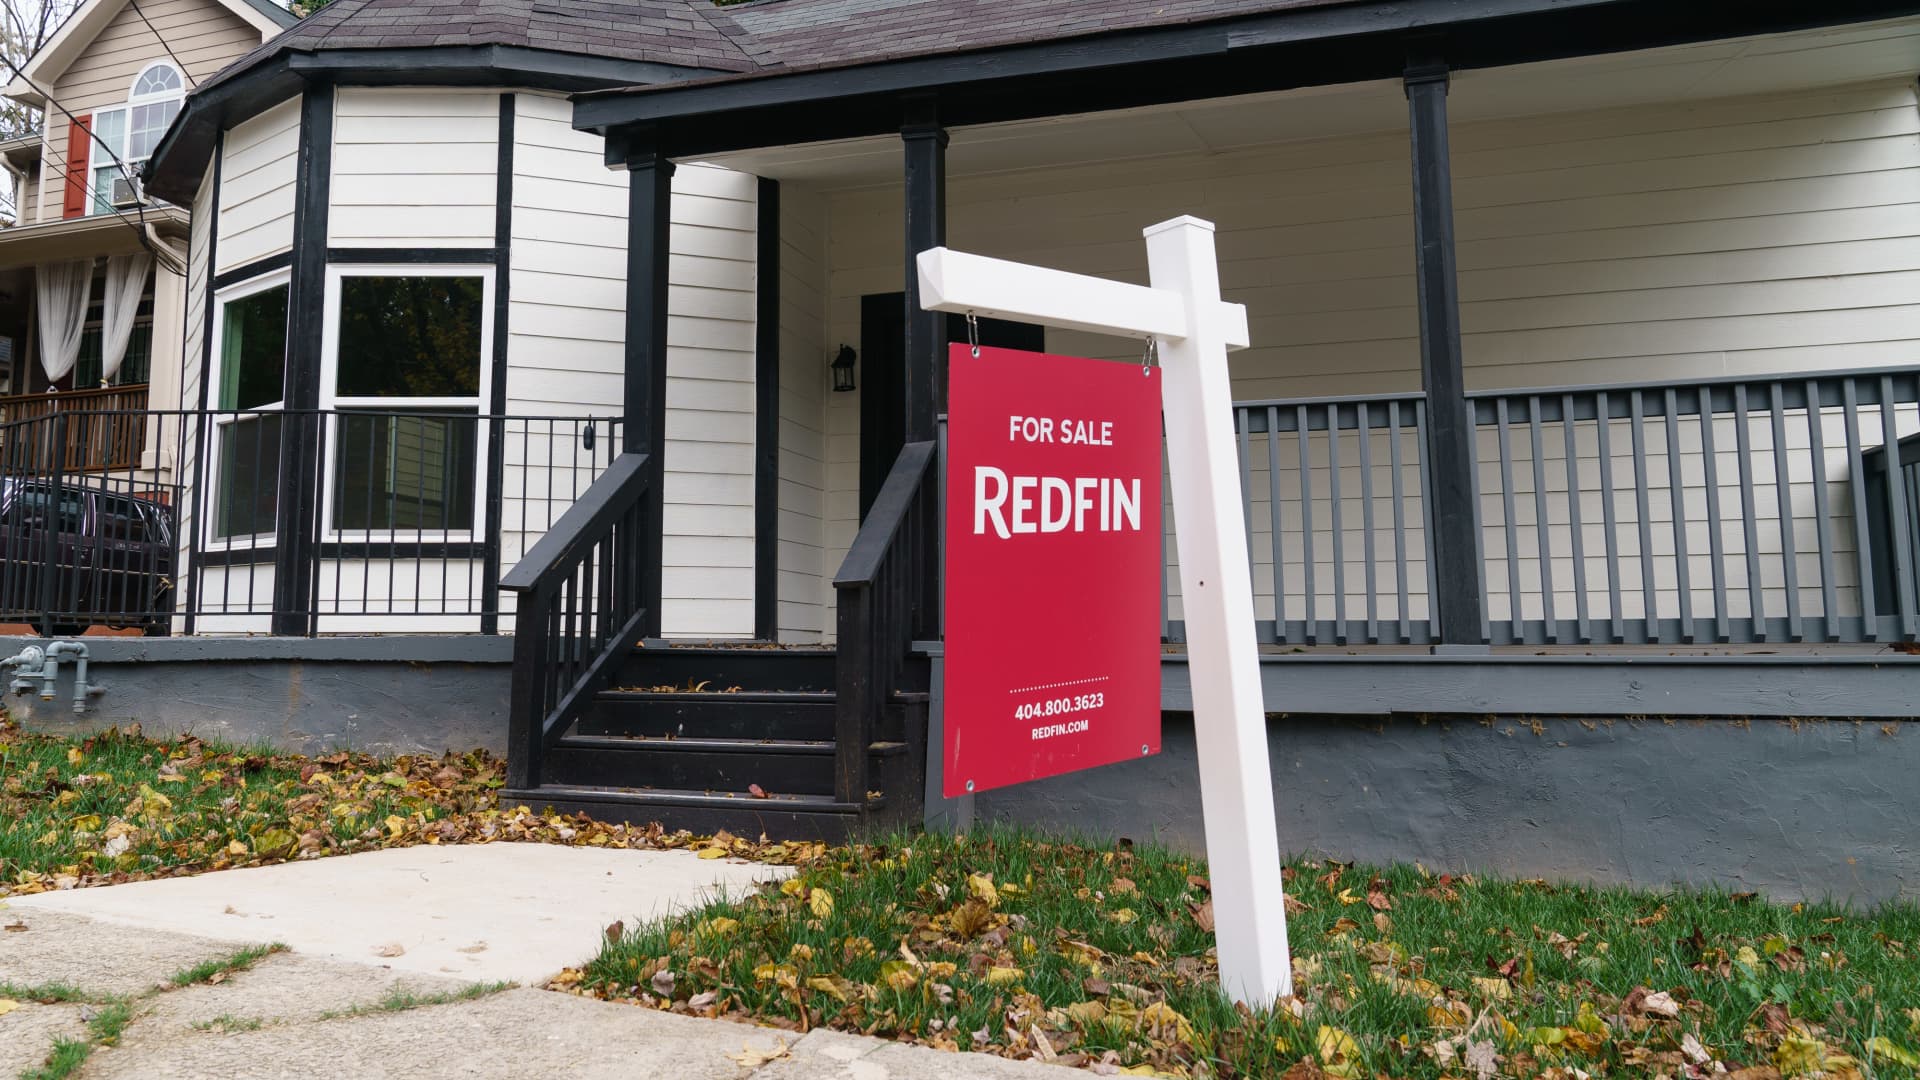 2023 was least affordable homebuying year: Redfin